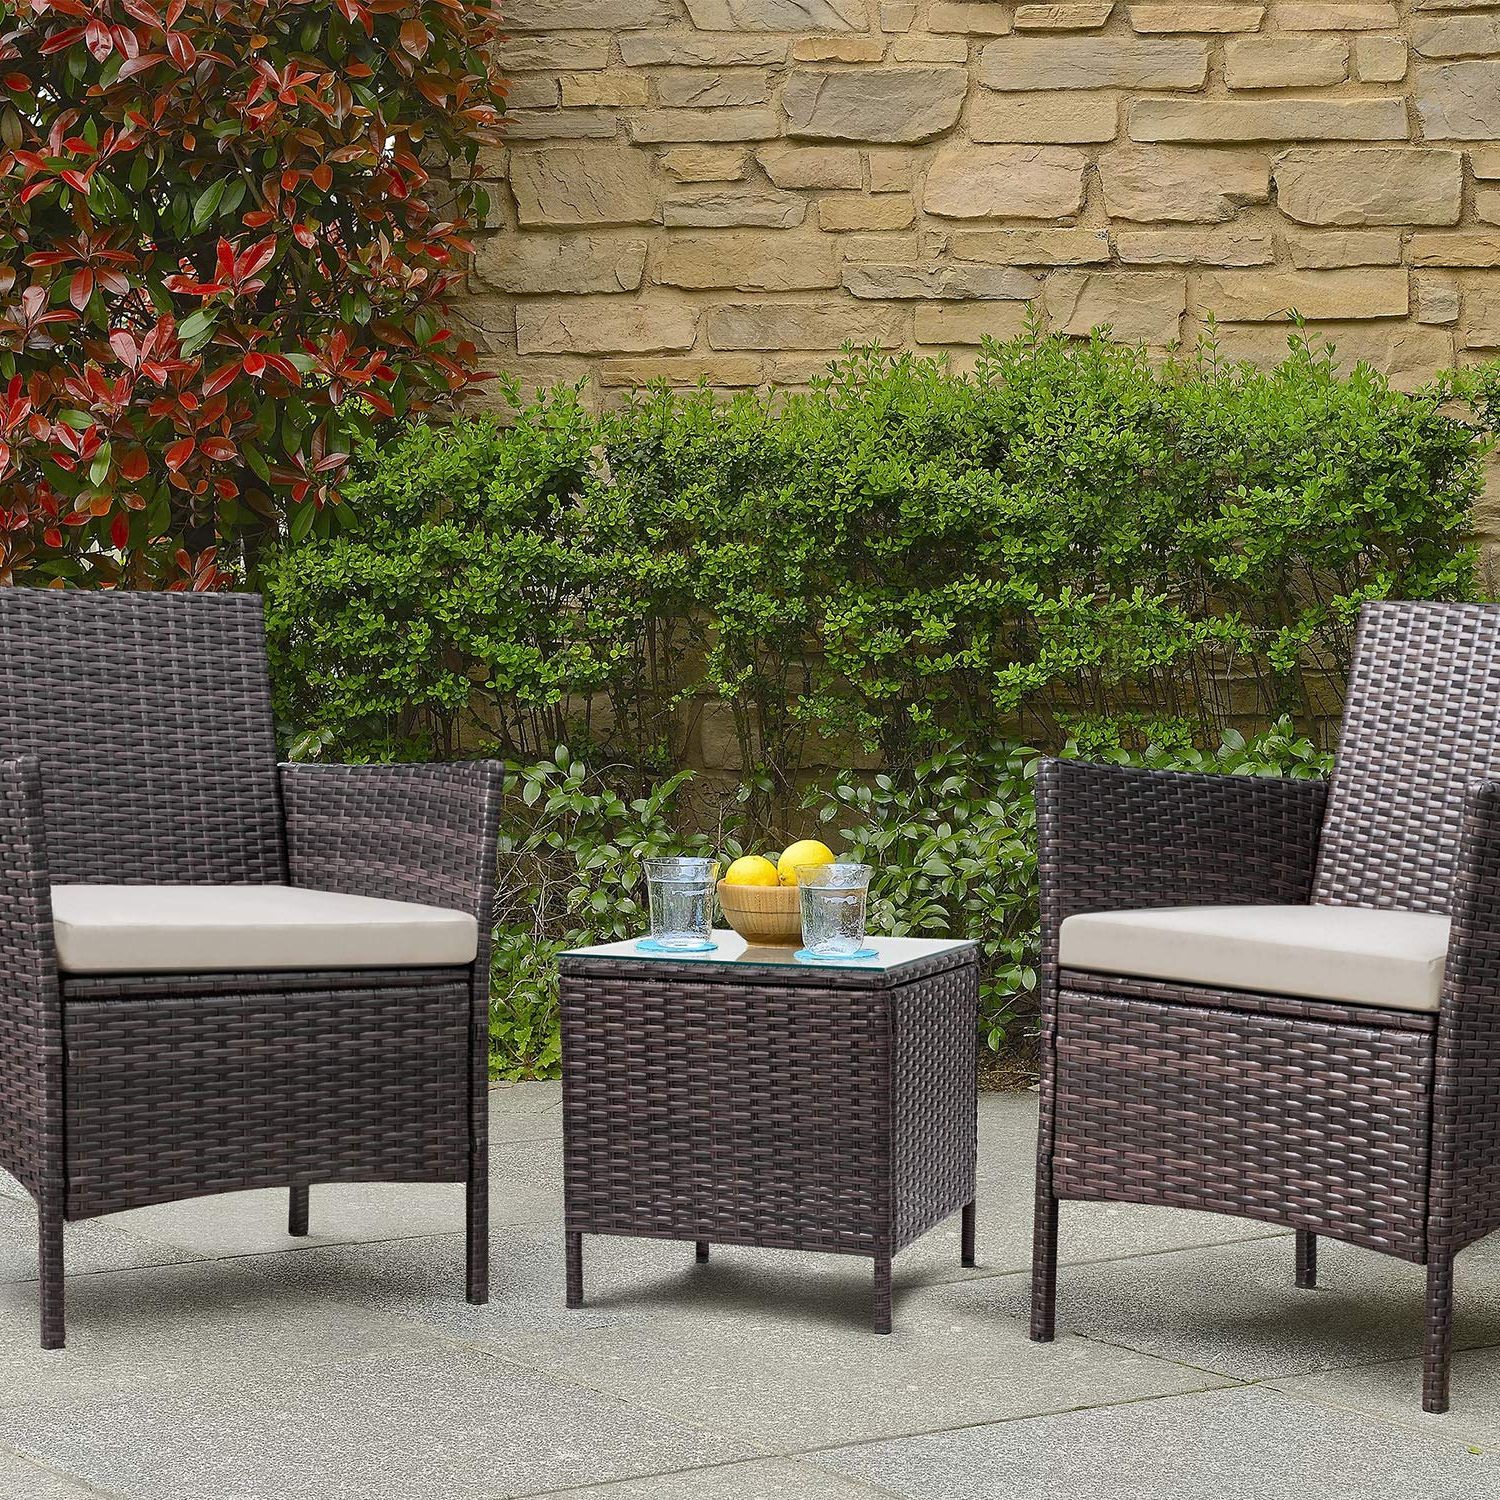 Most Popular Rattan Wicker Outdoor Seating Sets Pertaining To Devoko Patio Porch Furniture Sets 3 Pieces Pe Rattan Wicker Chairs With (View 13 of 15)